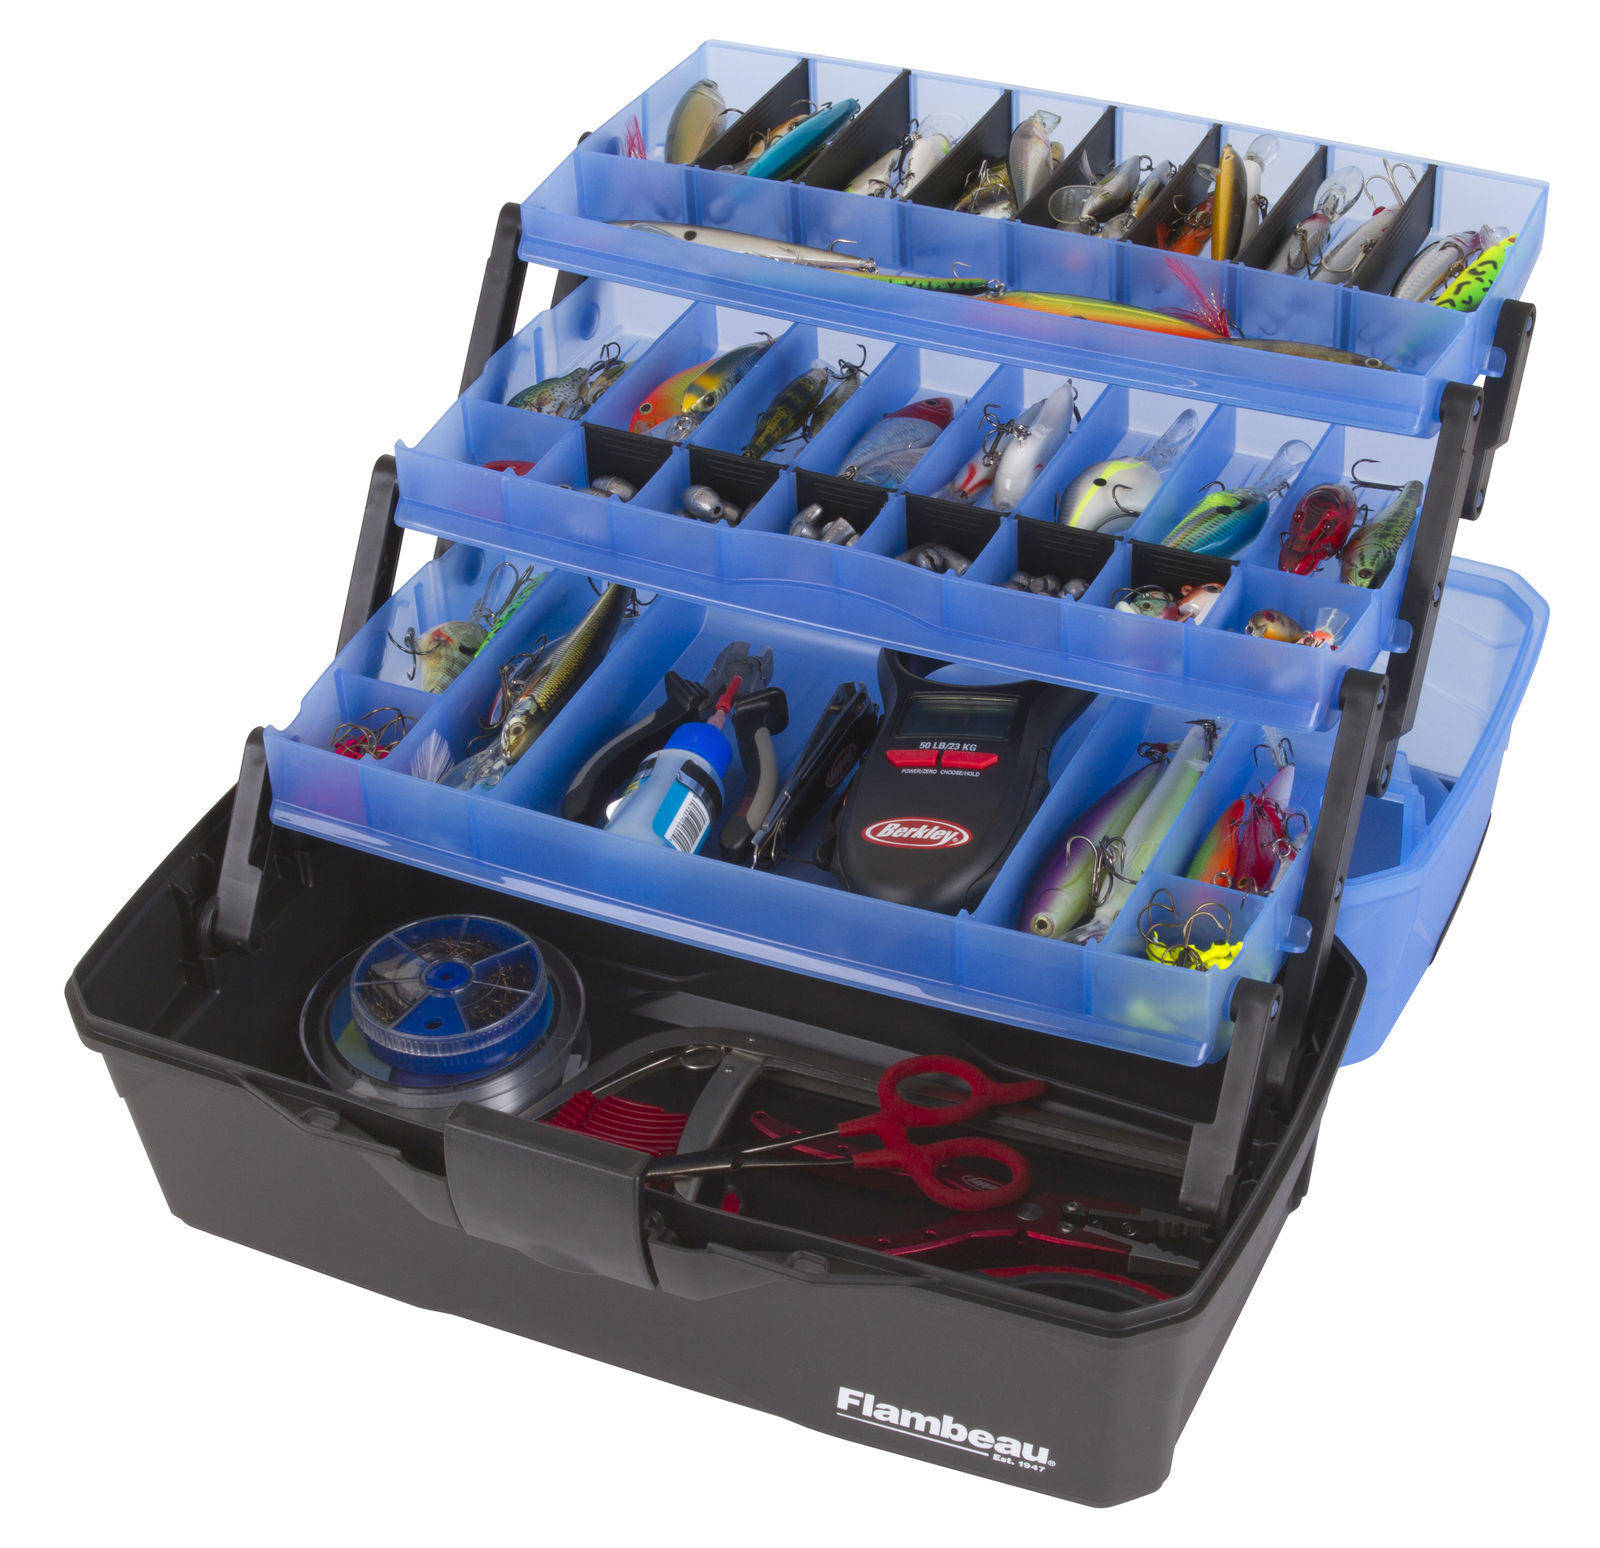 Used Flambeau Tackle Box With Fishing Lures, 55% OFF